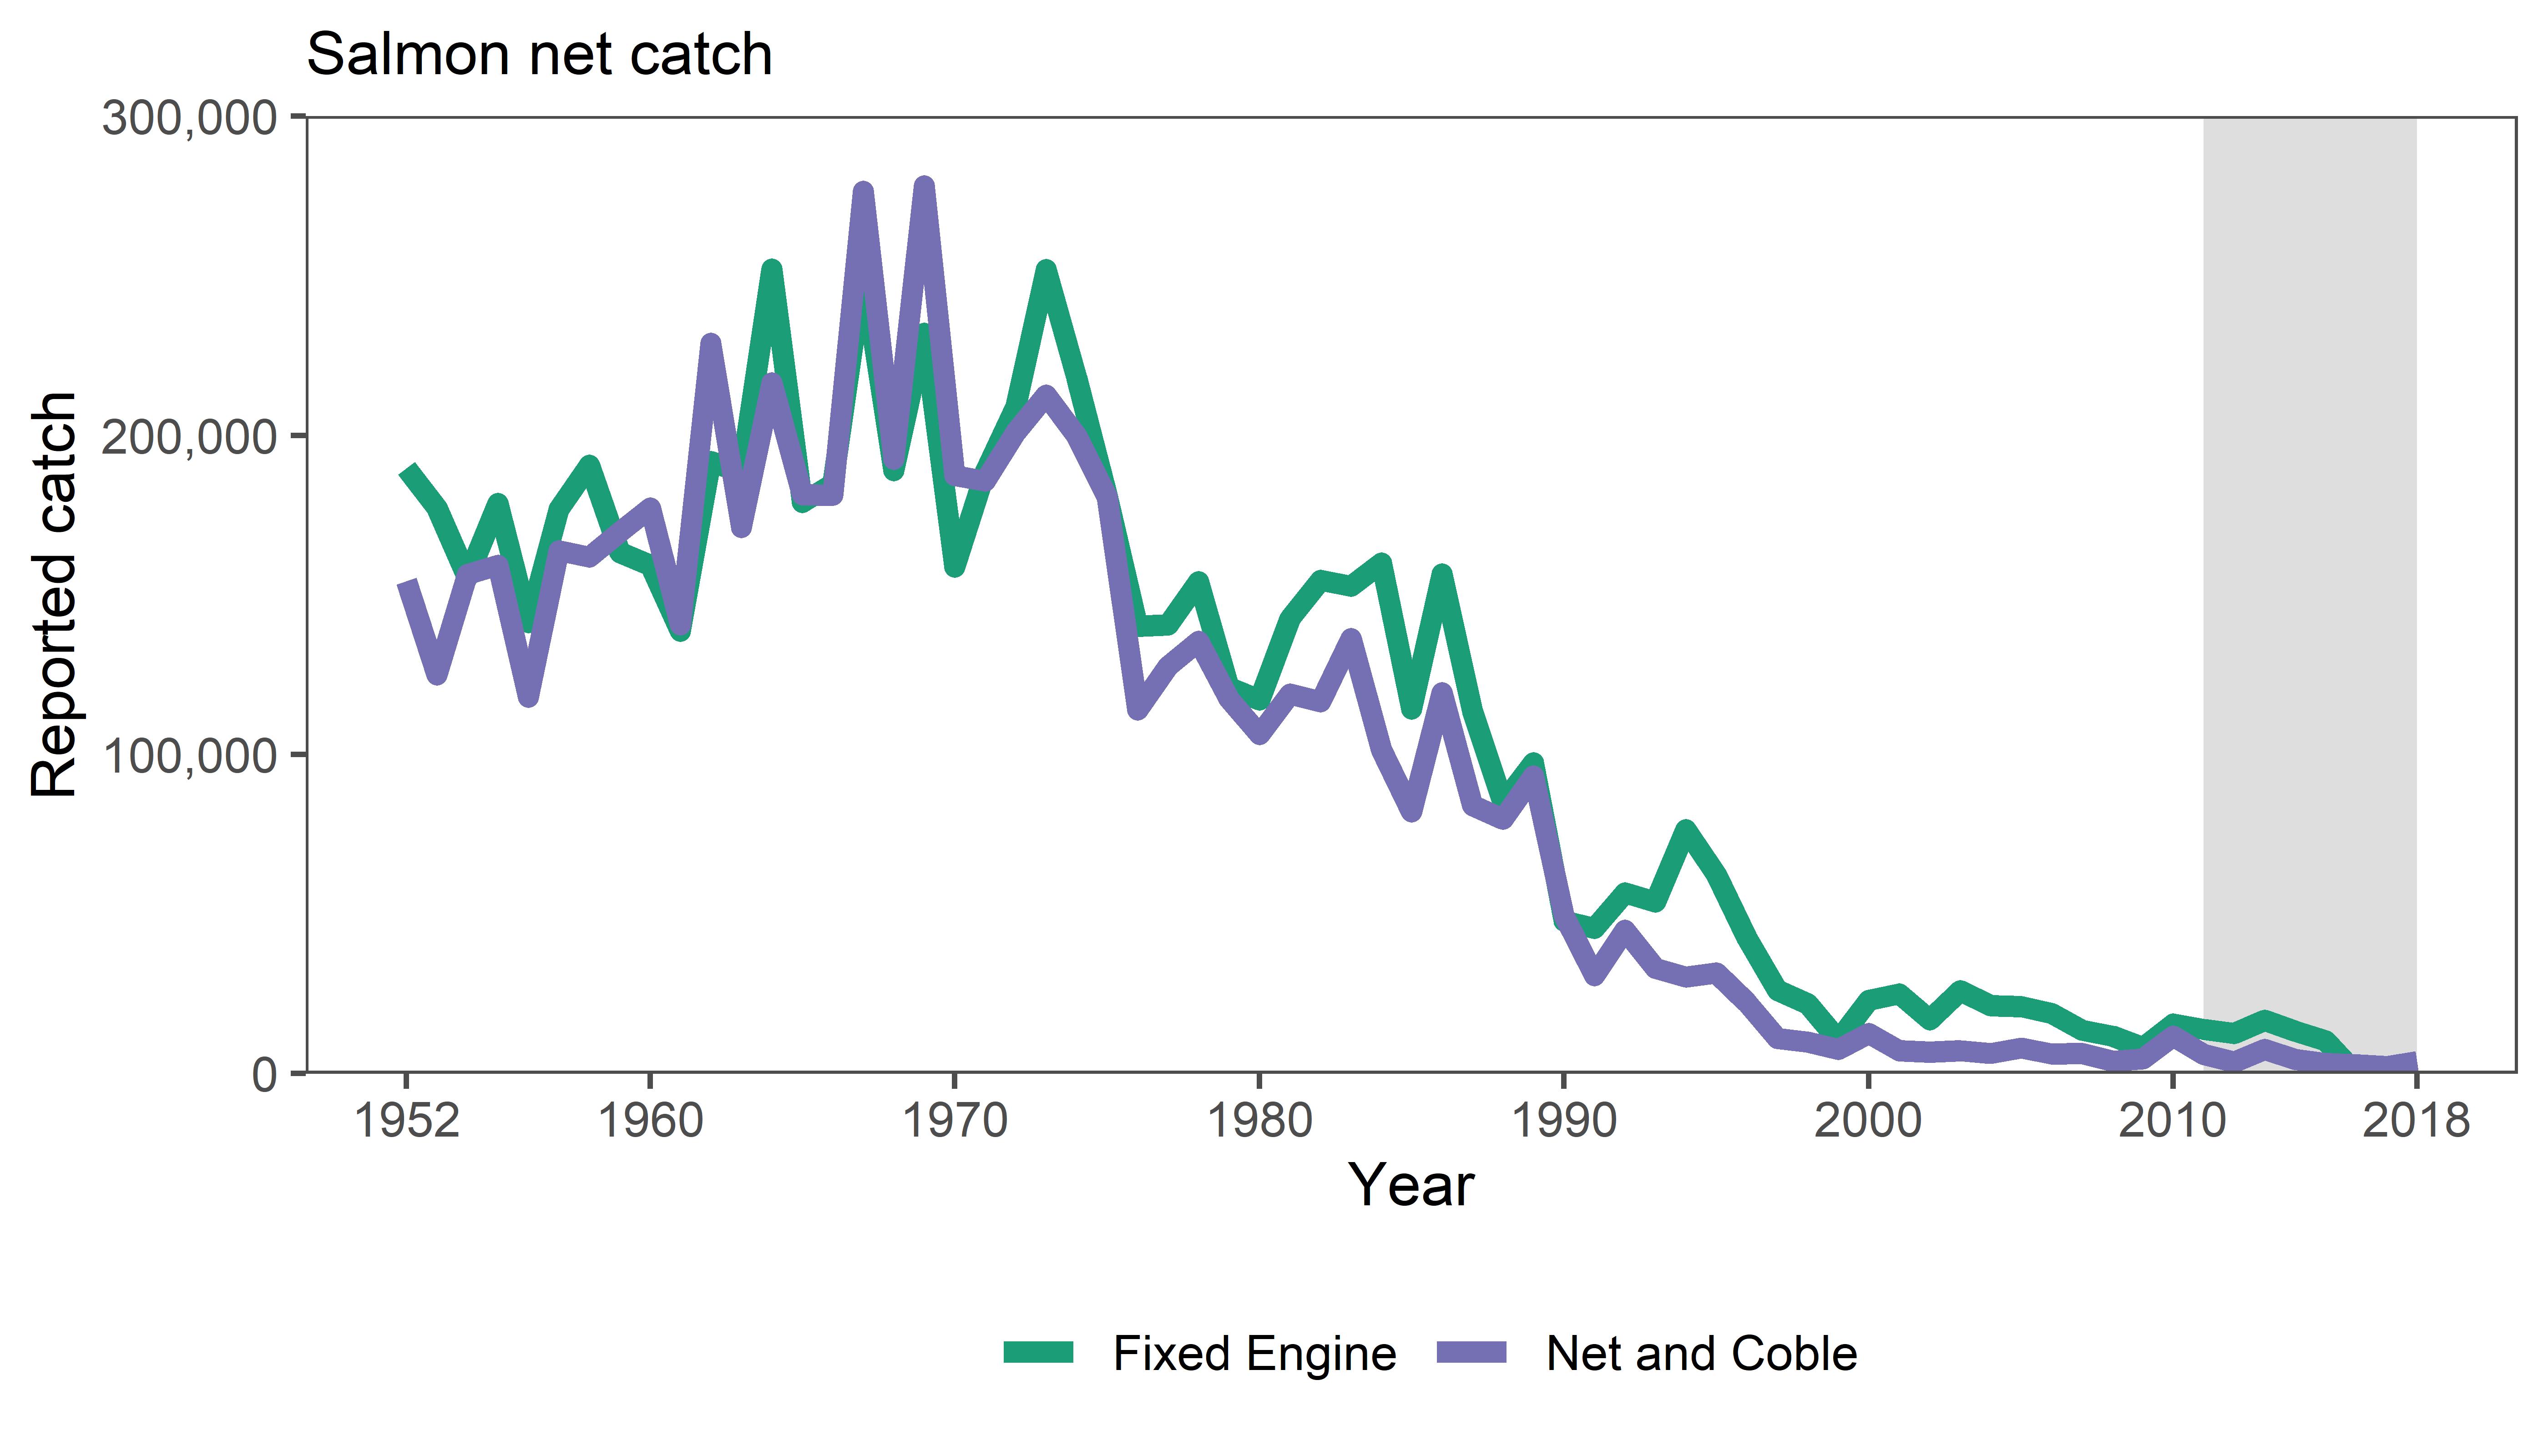 Figure 2: Reported catches of salmon from the fixed engine and net and coble fisheries in Scotland 1952 to 2018. Source: Marine Scotland